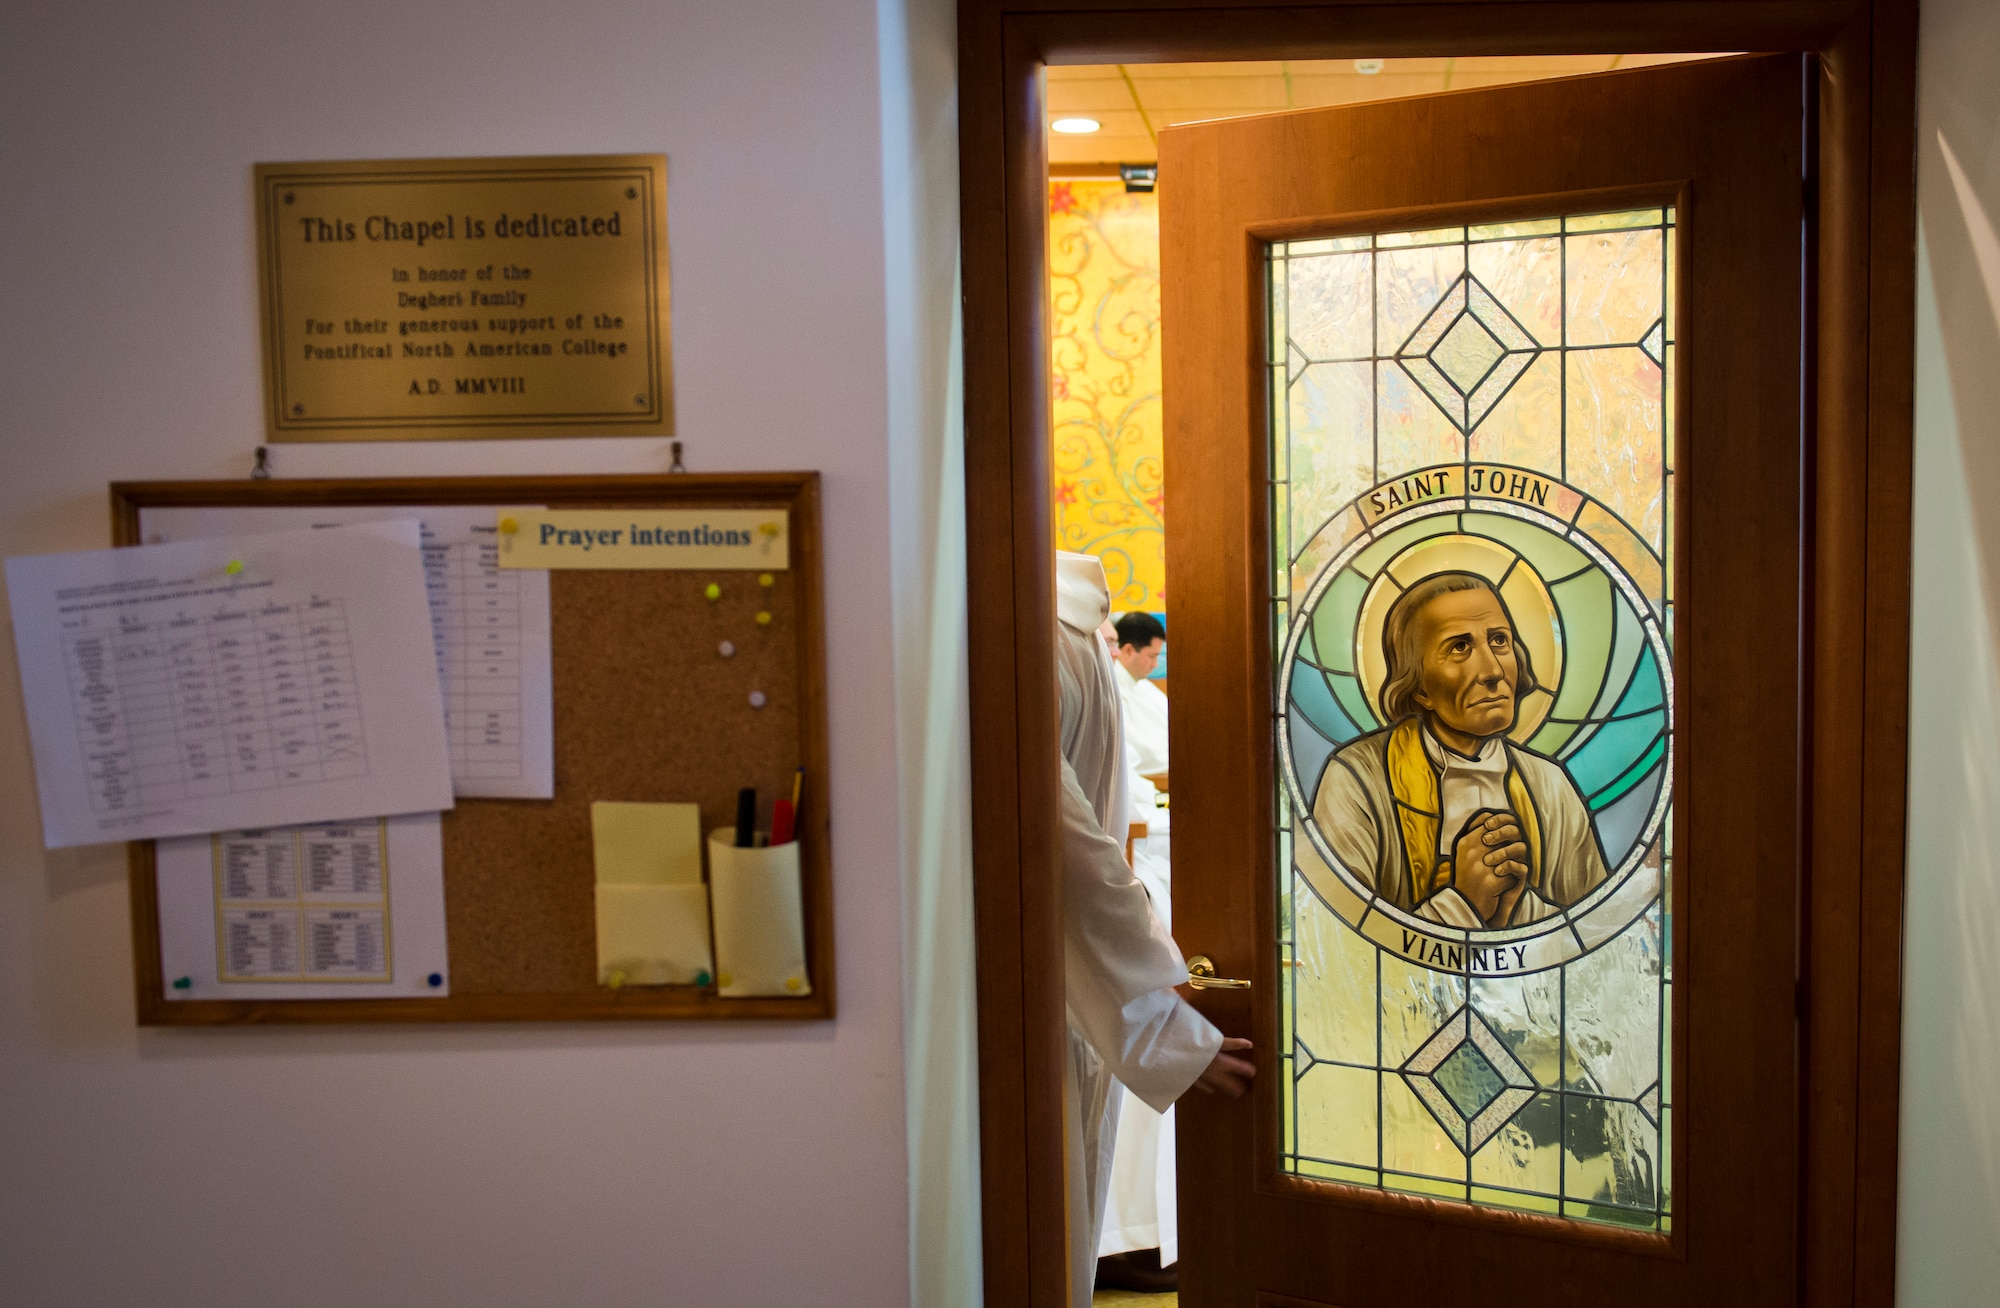 Retired Chaplain (Lt. Col.) Robert Bruno closes the door to the chapel as he joins Catholic Mass on the Northern American College campus in Rome. (U.S. Air Force photo/Staff Sgt. Andrew Lee)